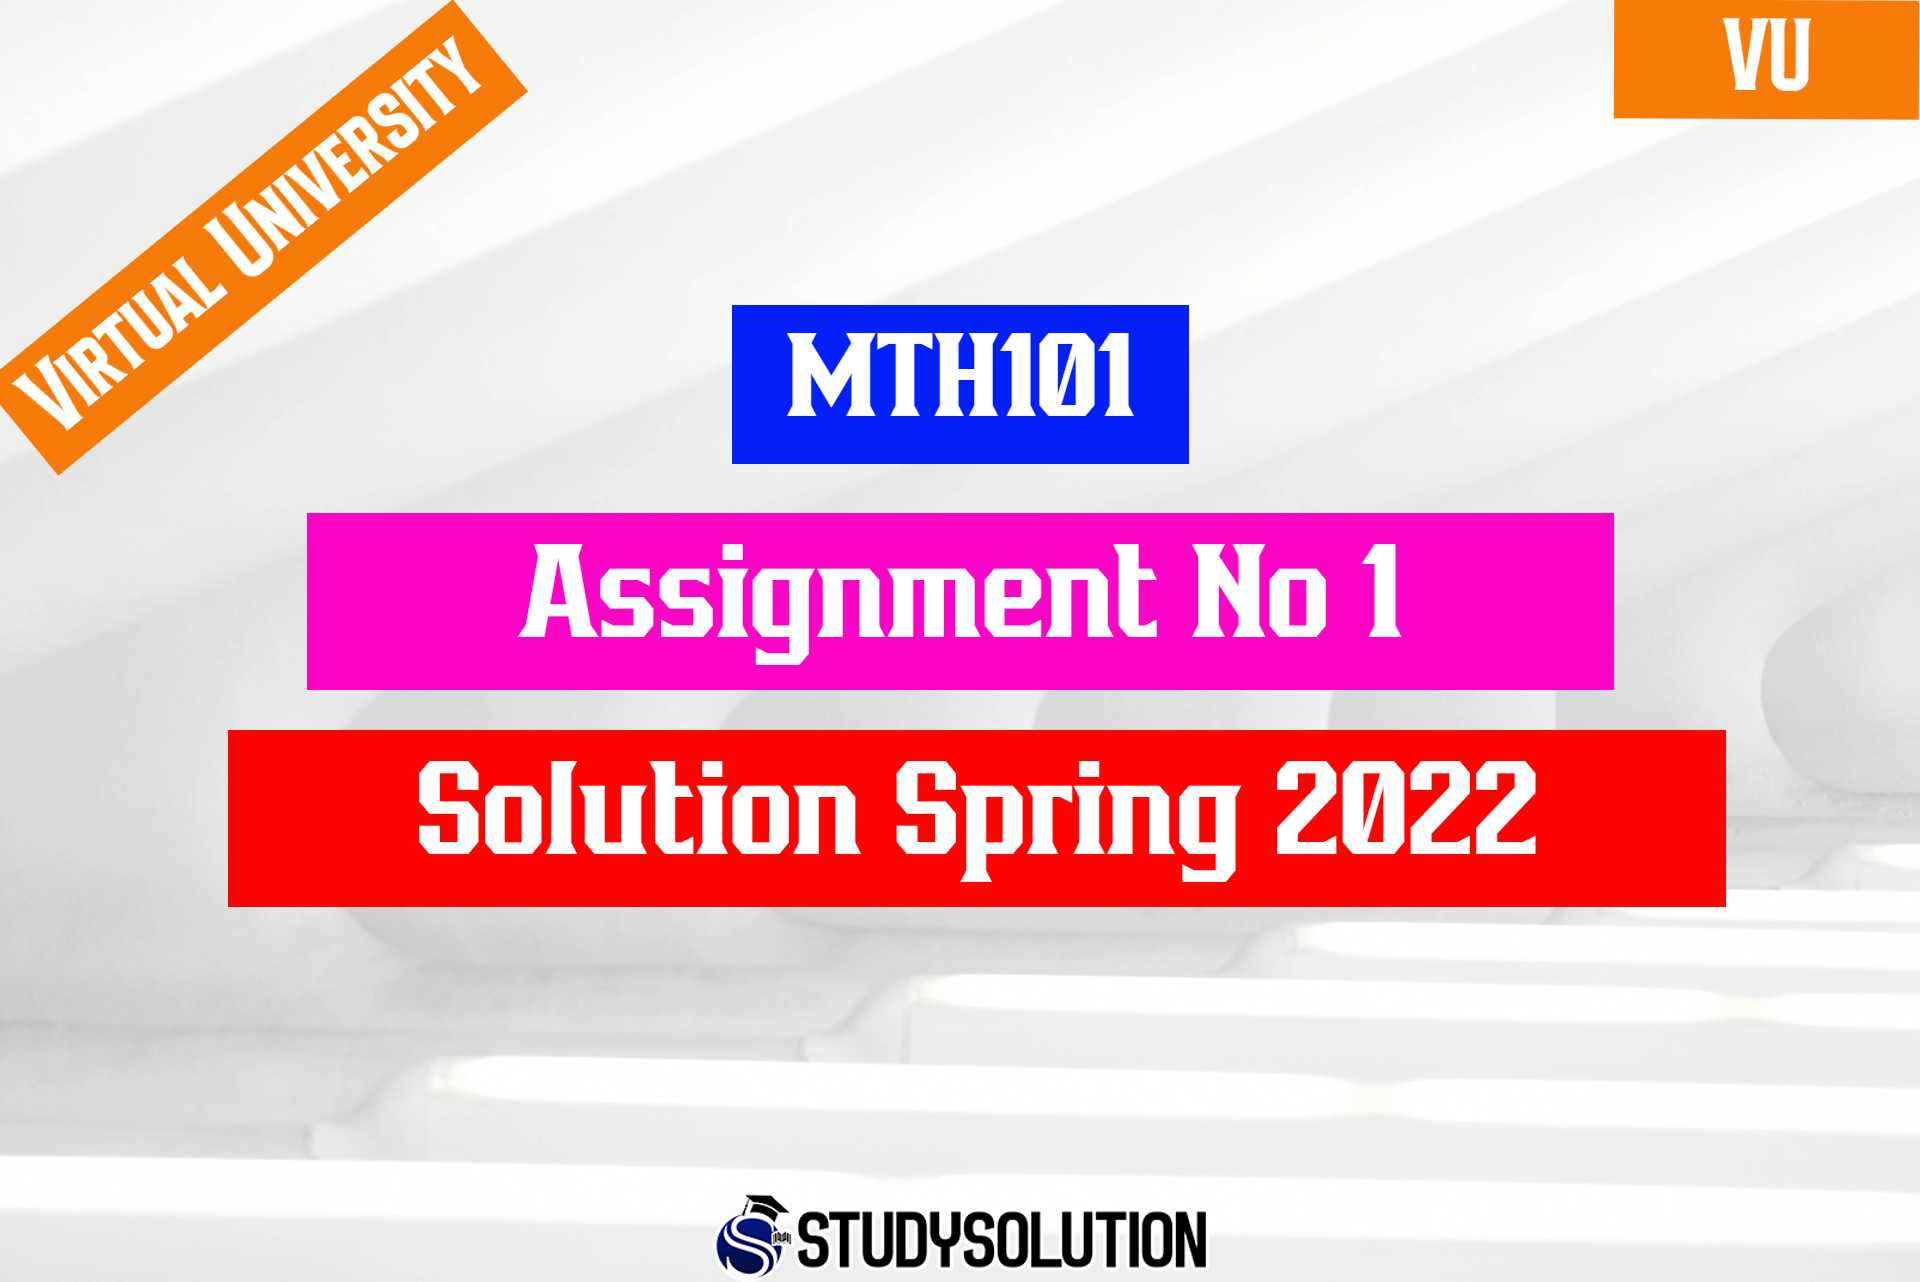 MTH101 Assignment No 1 Solution Spring 2022